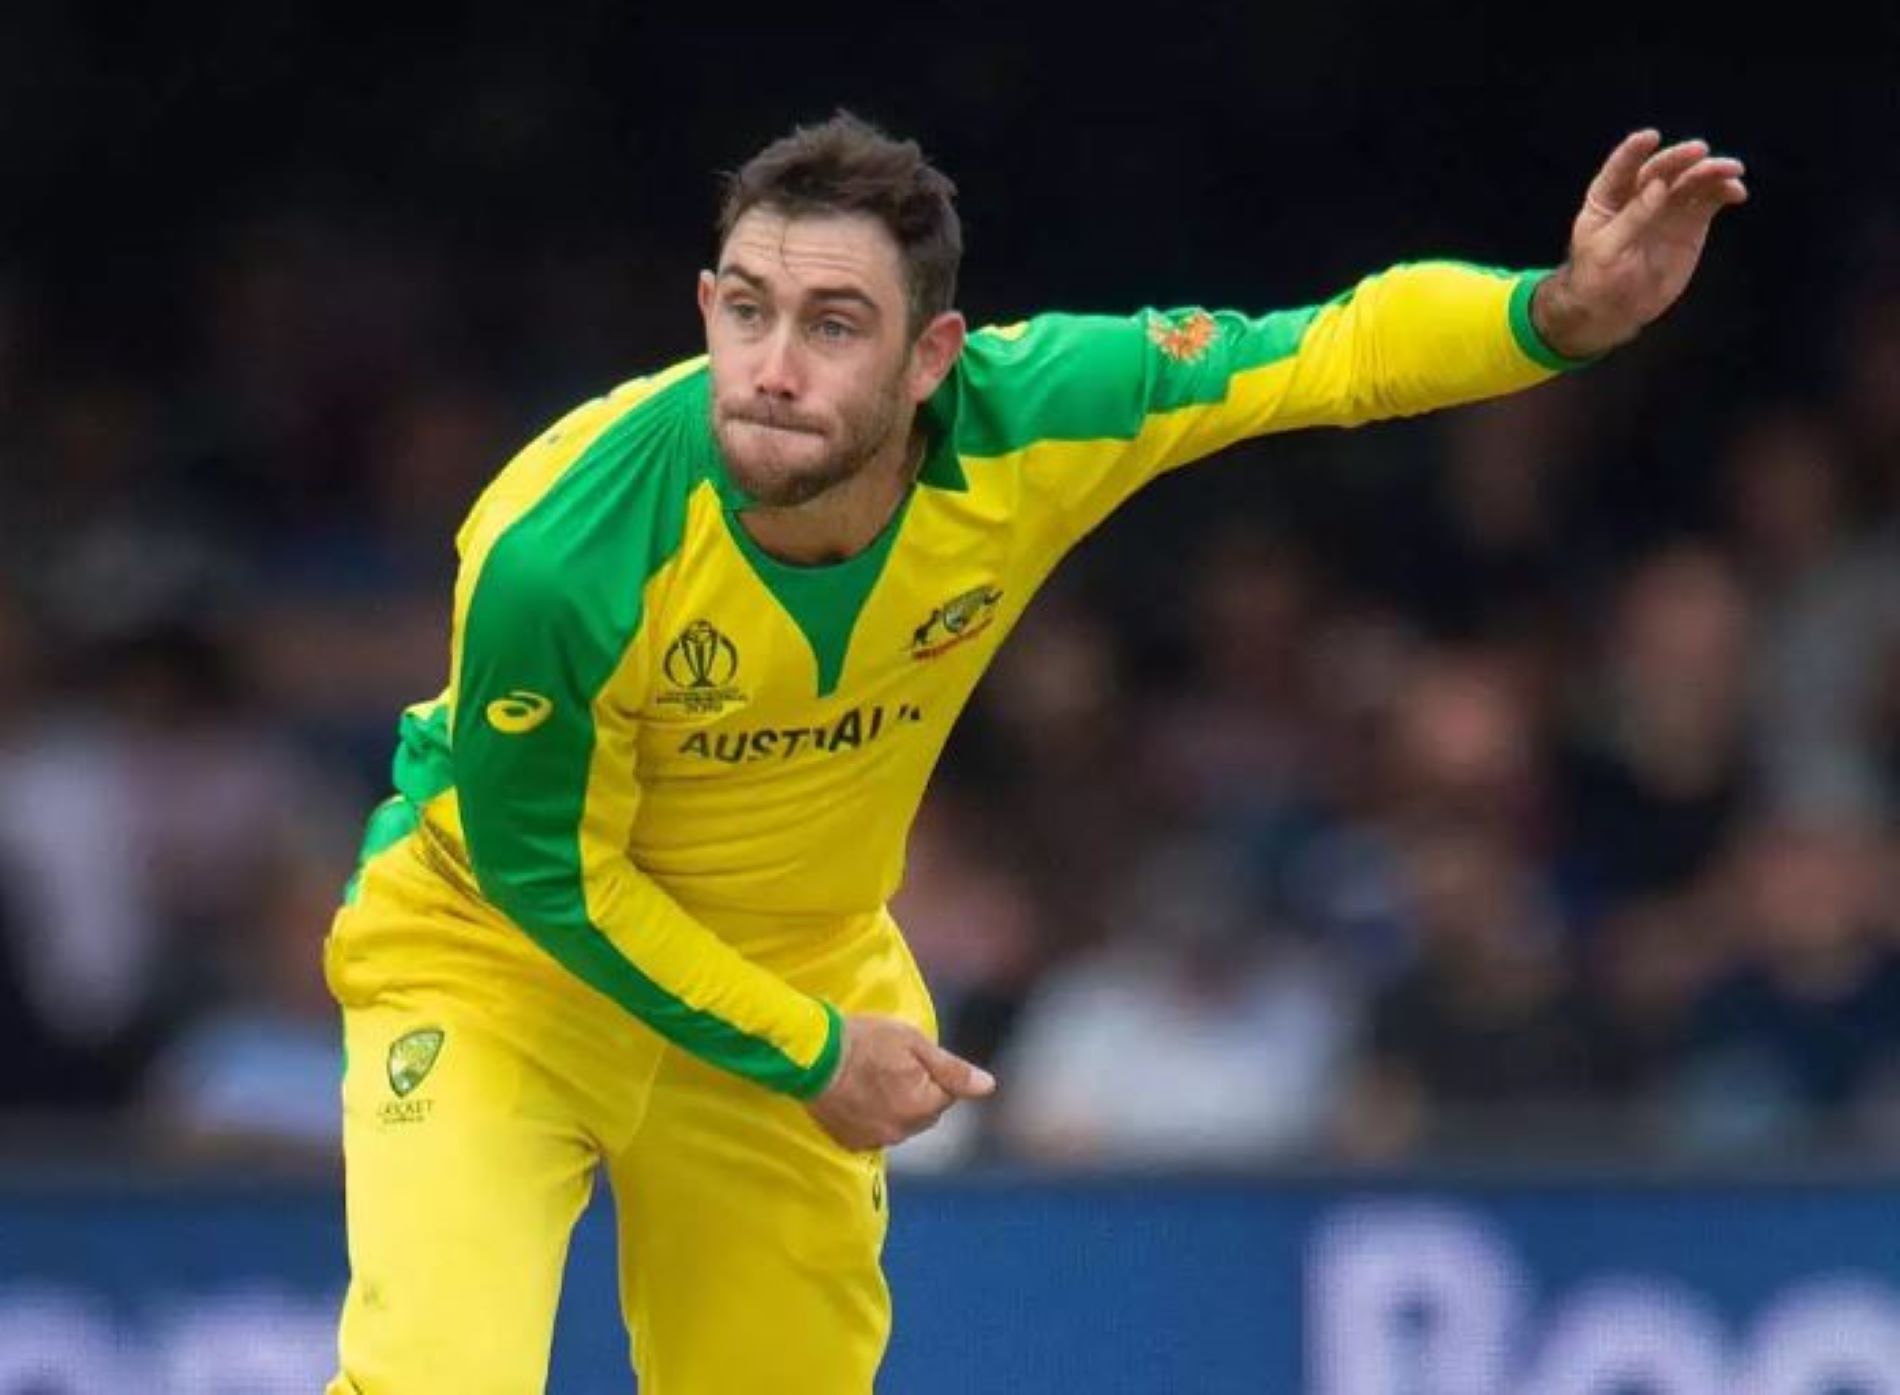 Australia are likely to depend heavily on Maxwell